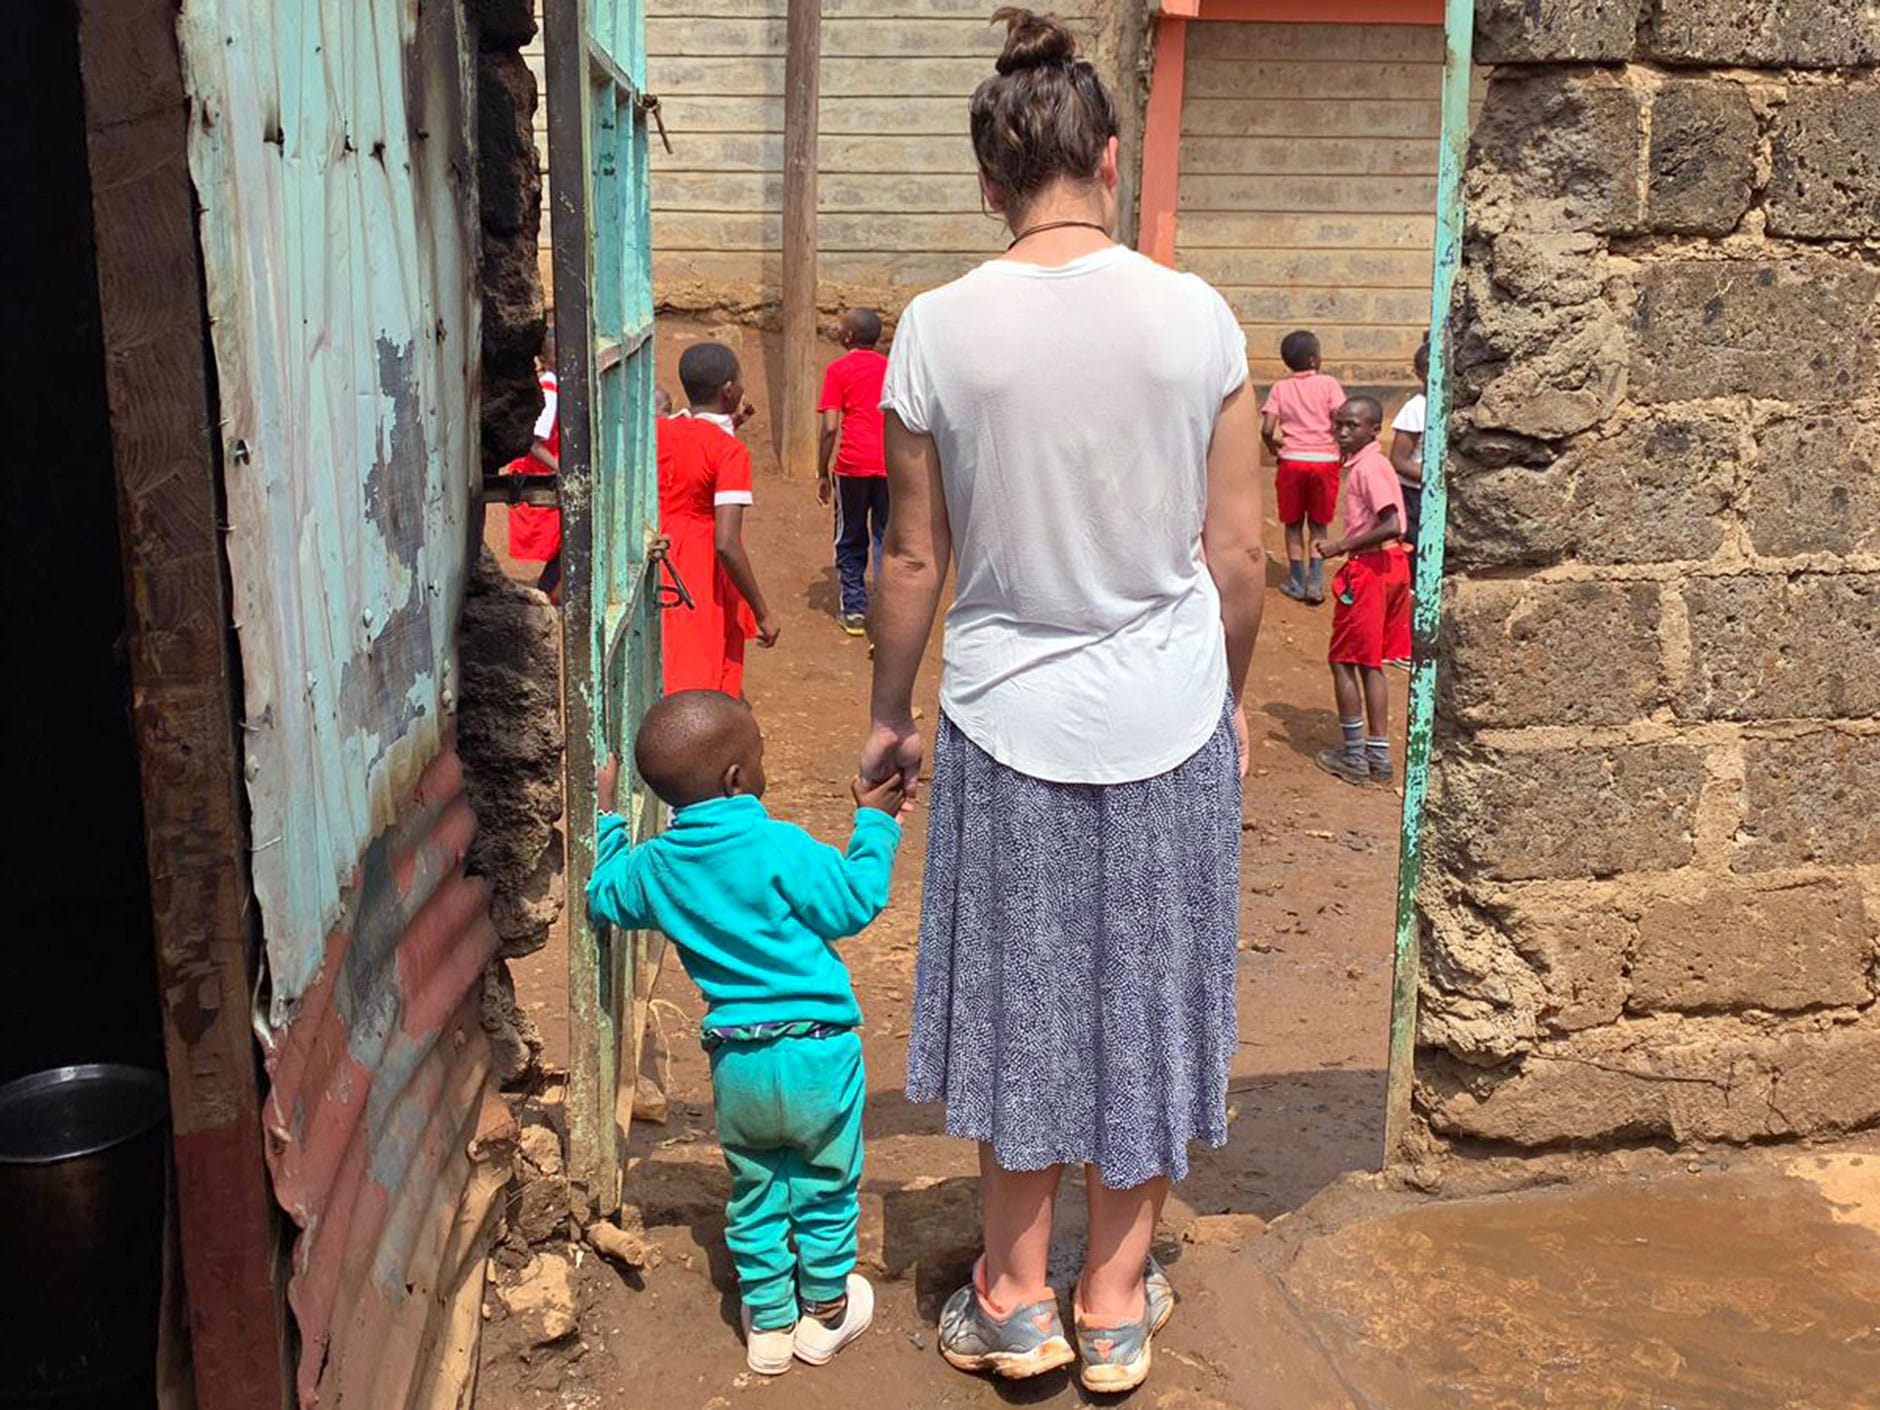 Emma Roca '21 holding a young child's hand at an orphanage in Africa